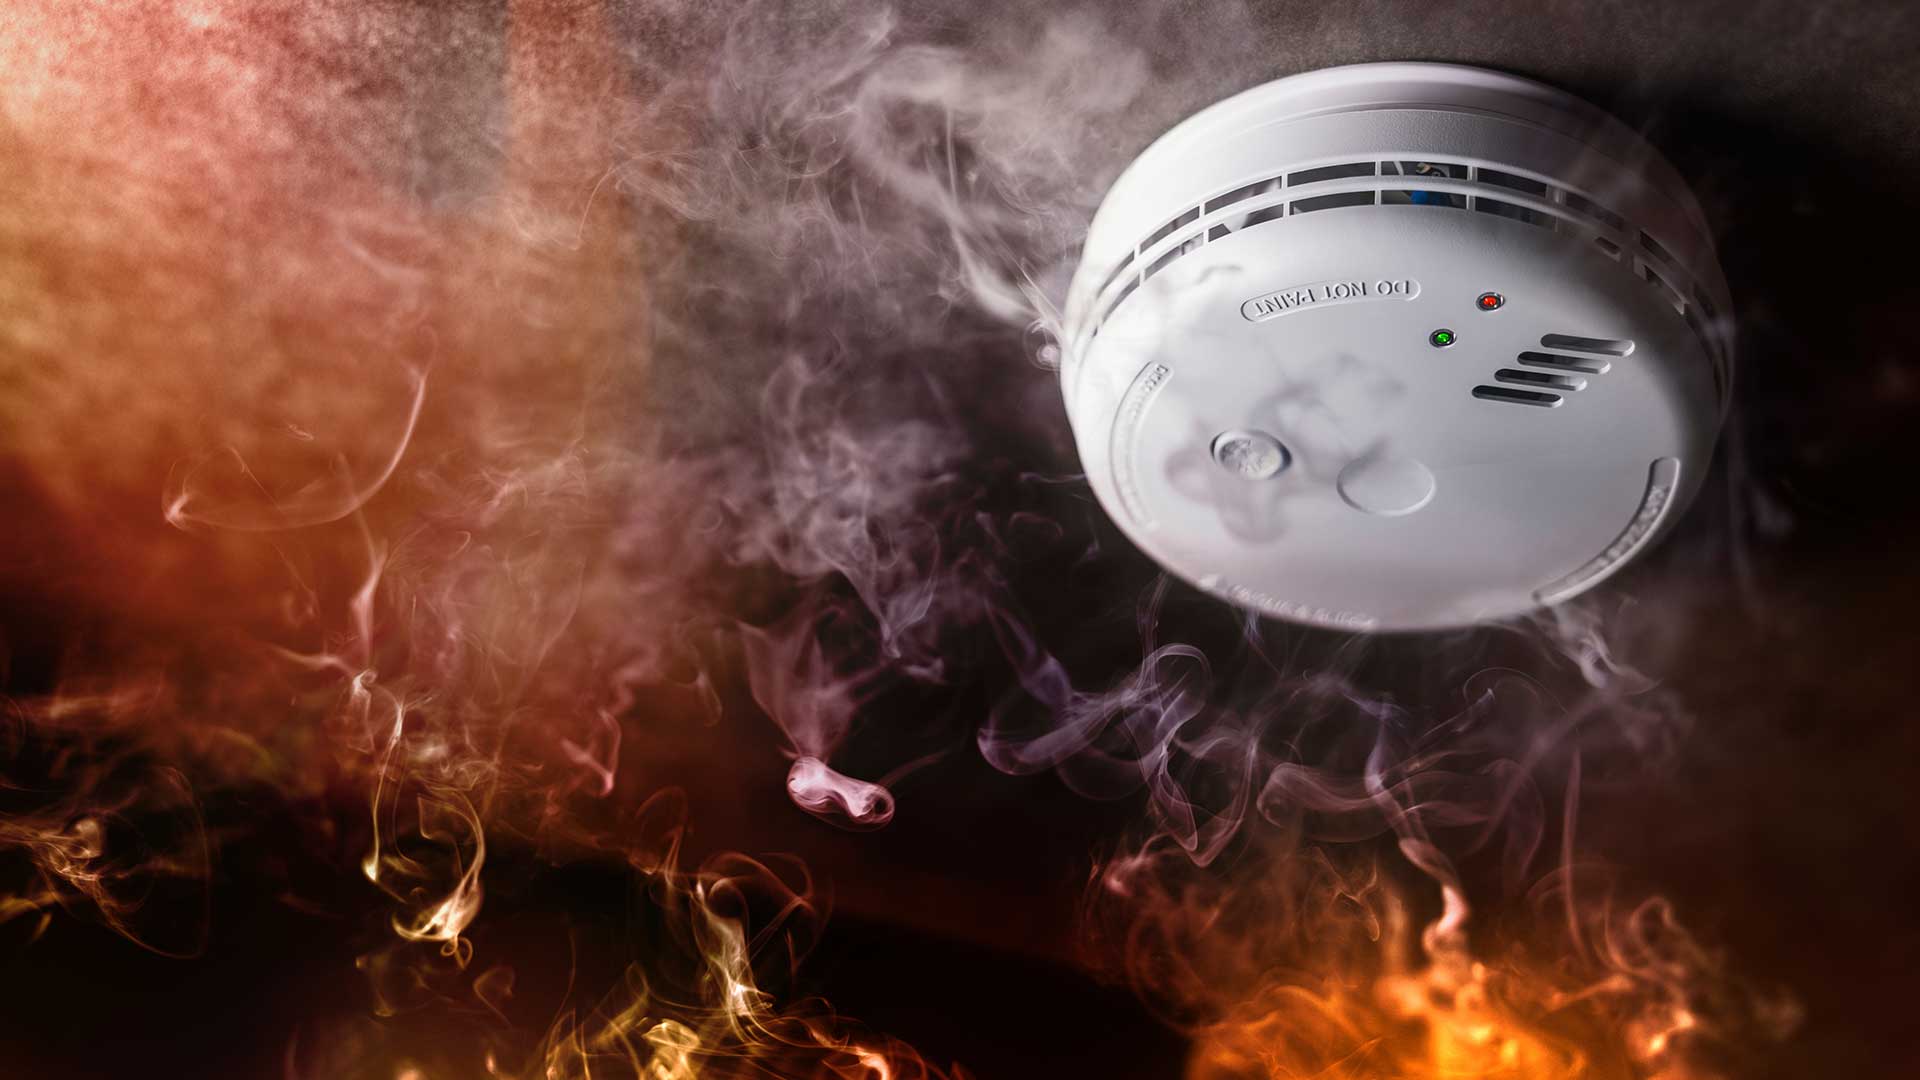 Image of smoke alarm activating to warn people of a fire.